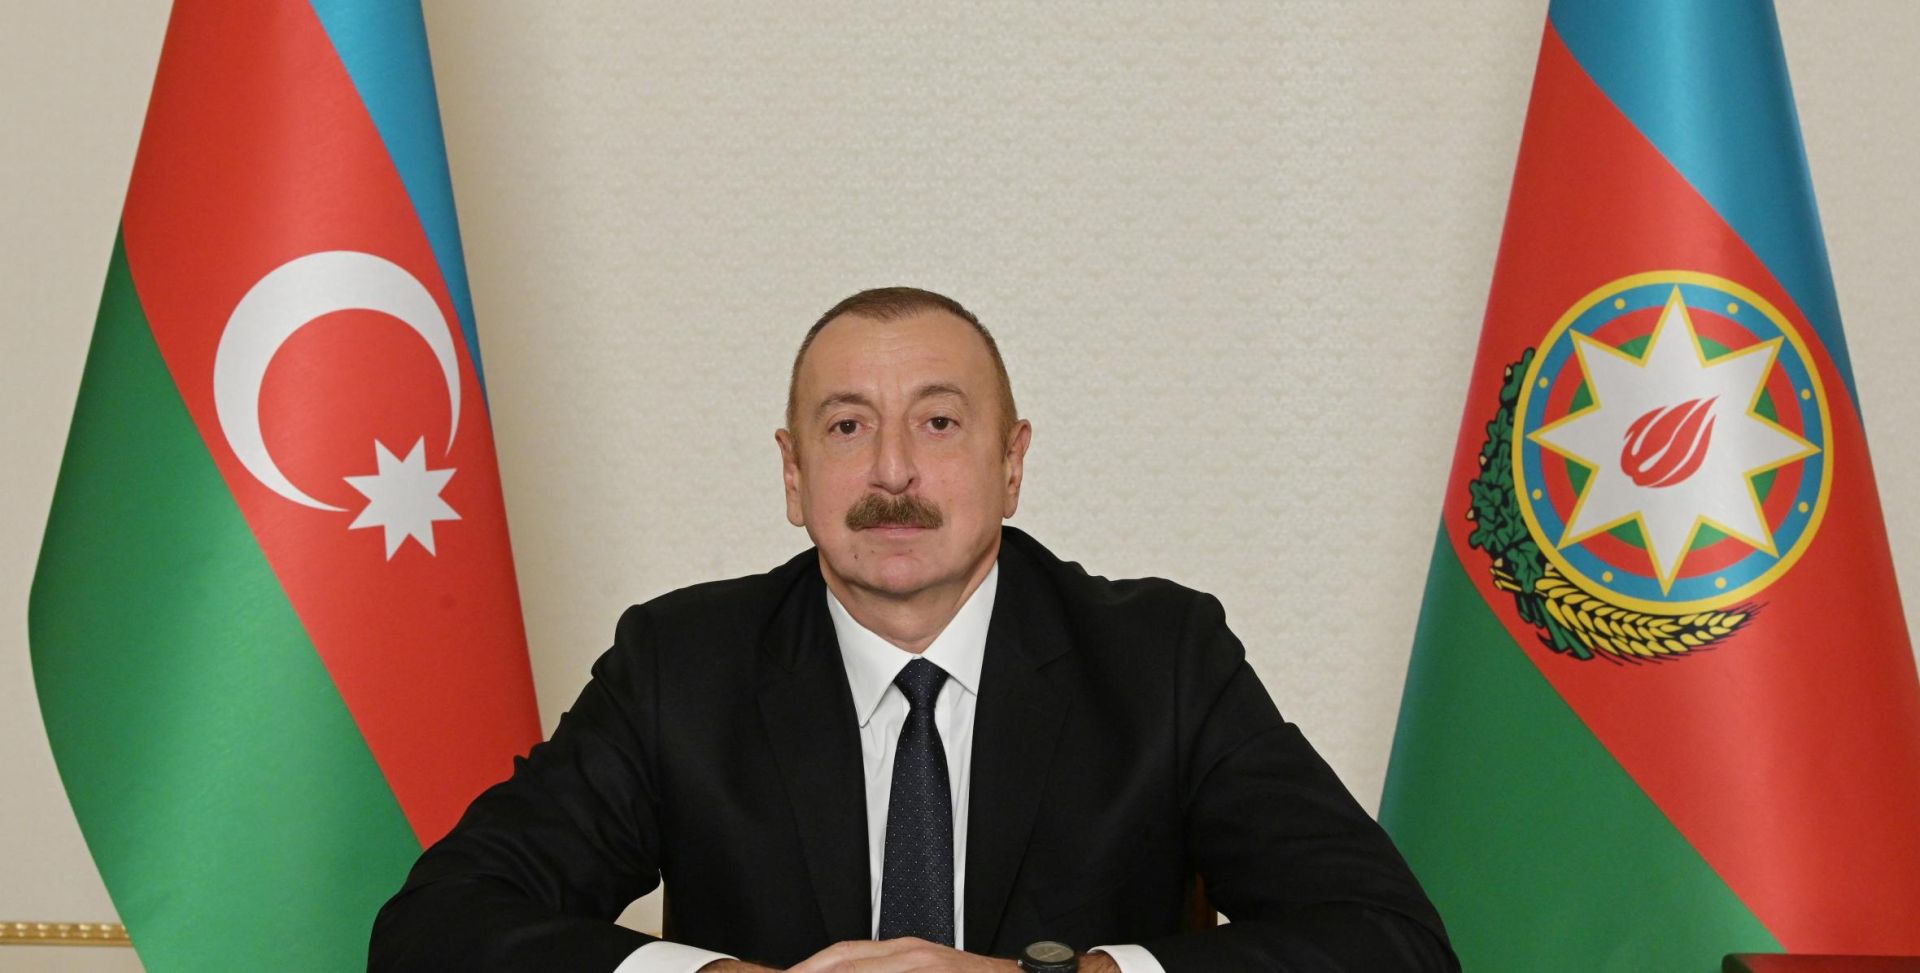 More than AZN 5.4 million allocated to Ministry of Youth and Sports of Azerbaijan – Order